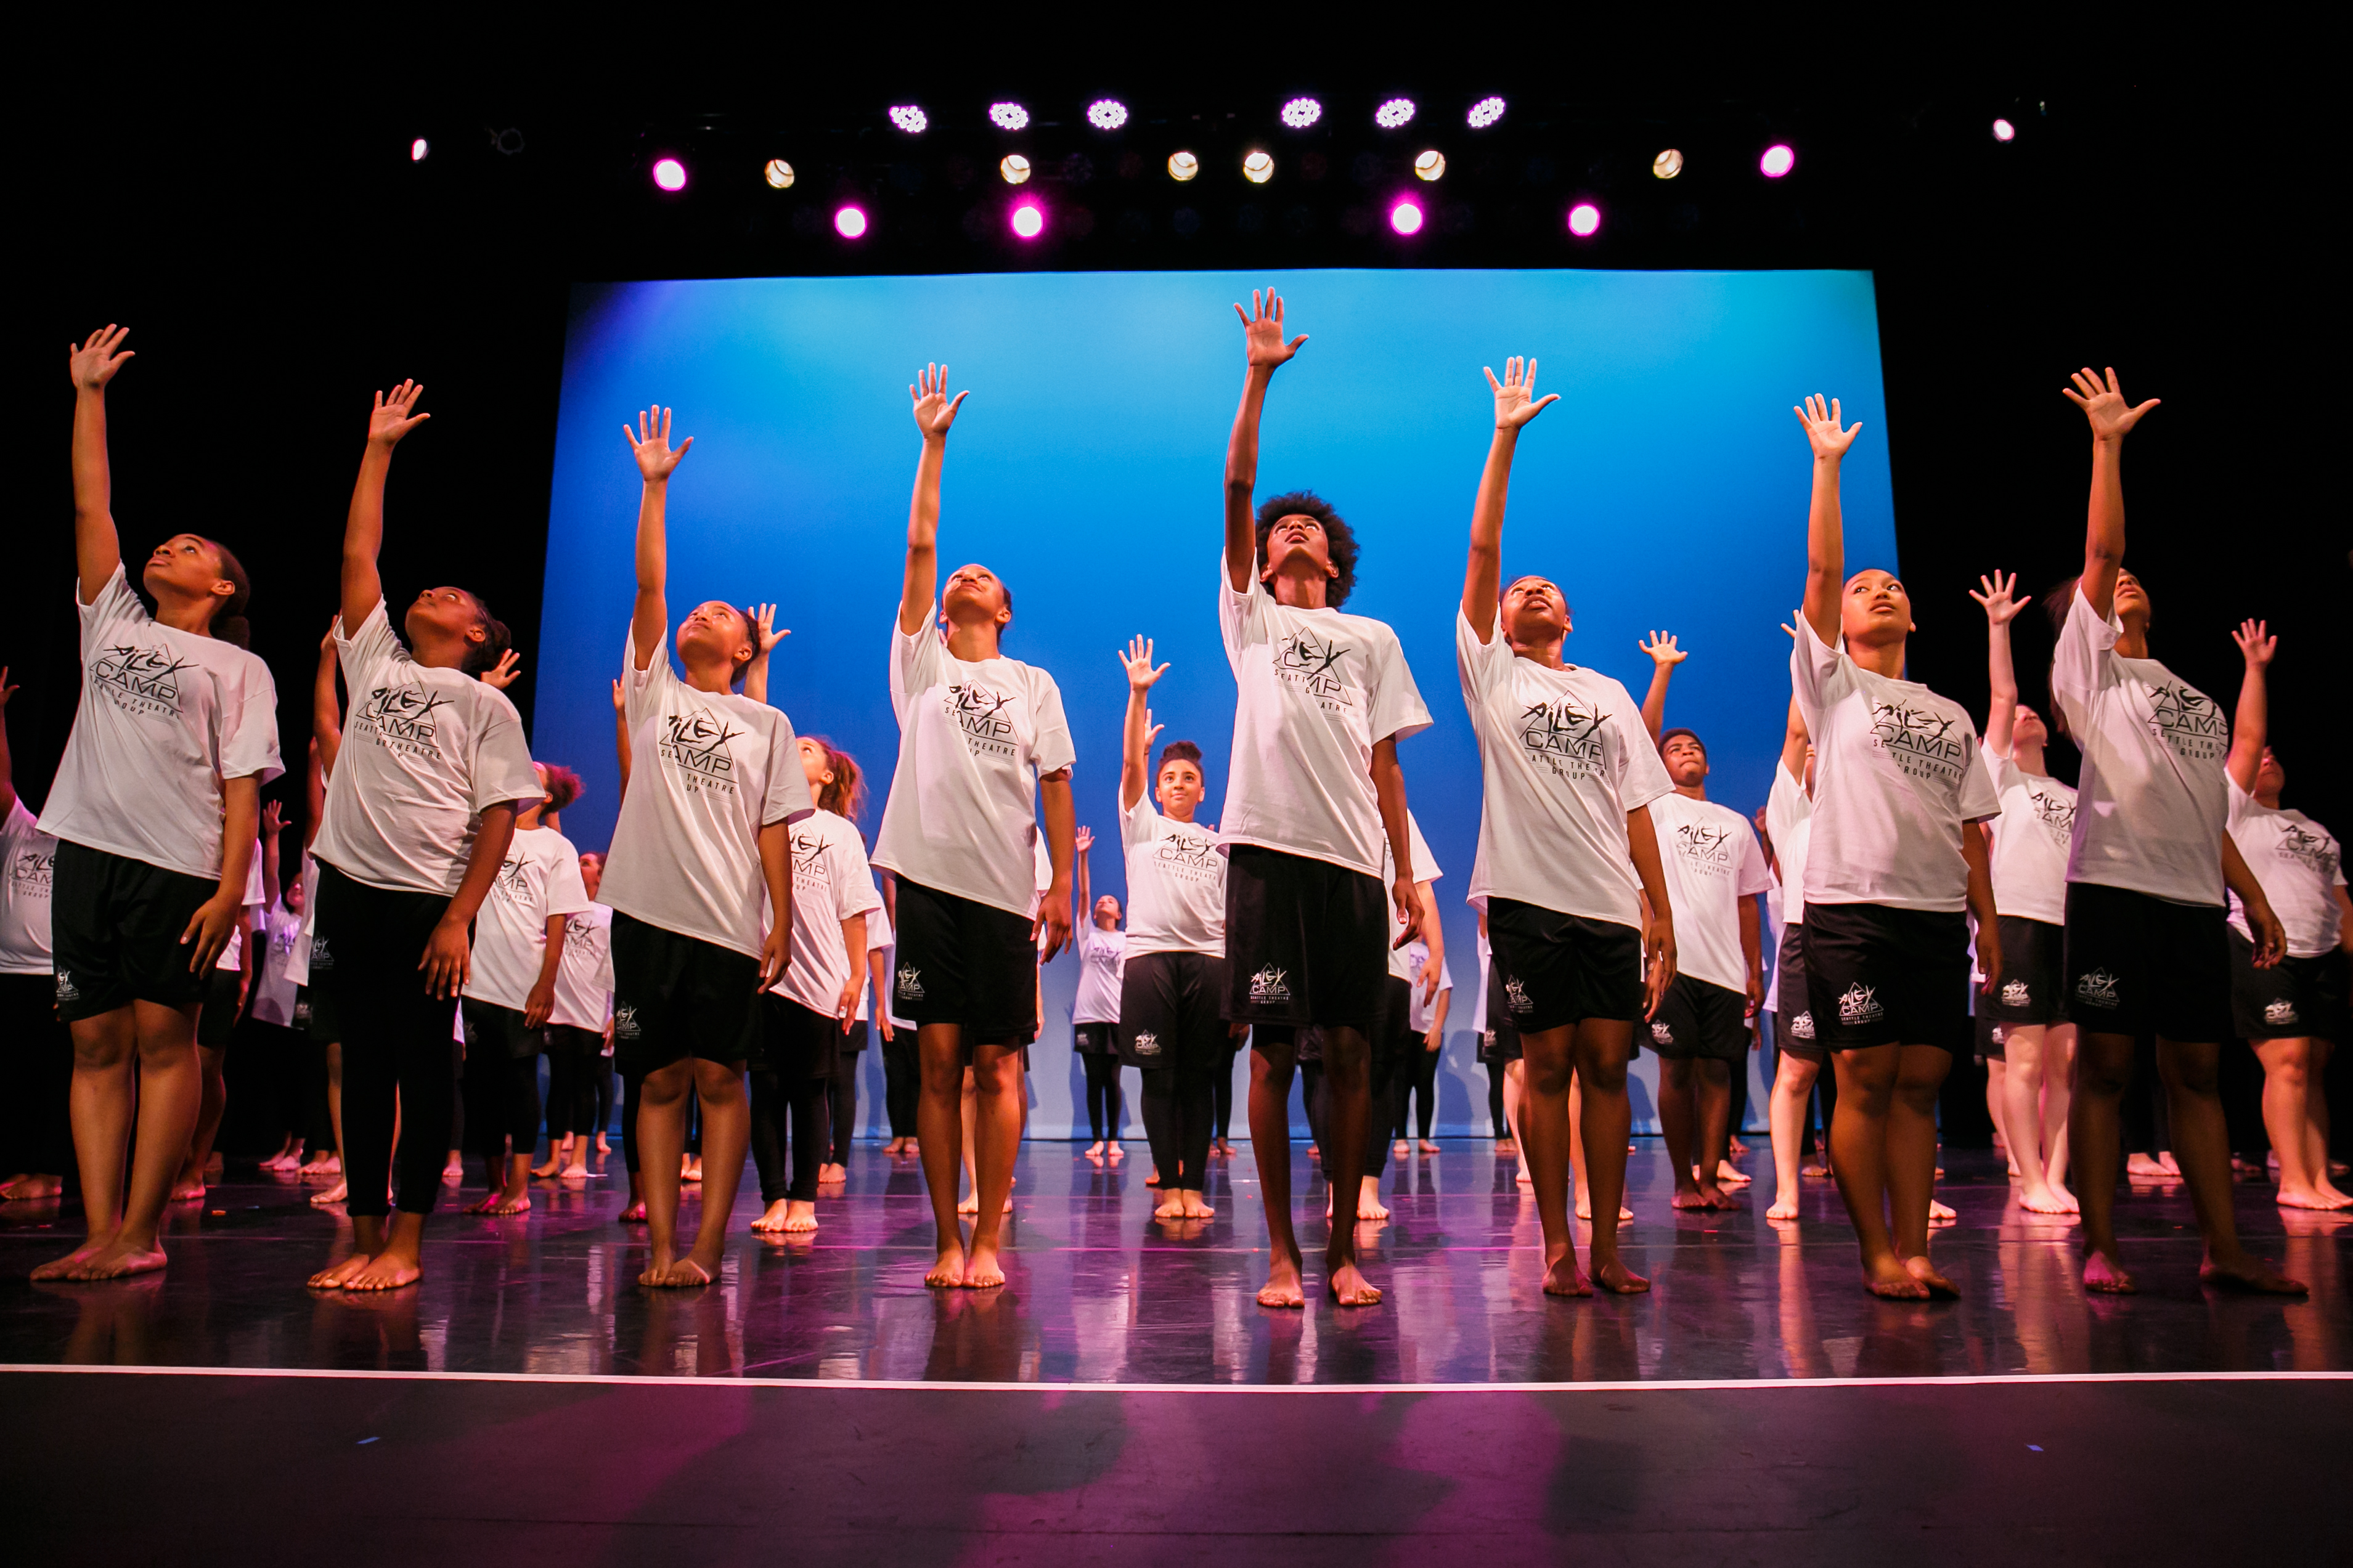 STG's AileyCamp is About Much More Than Just Dance Seattle Refined